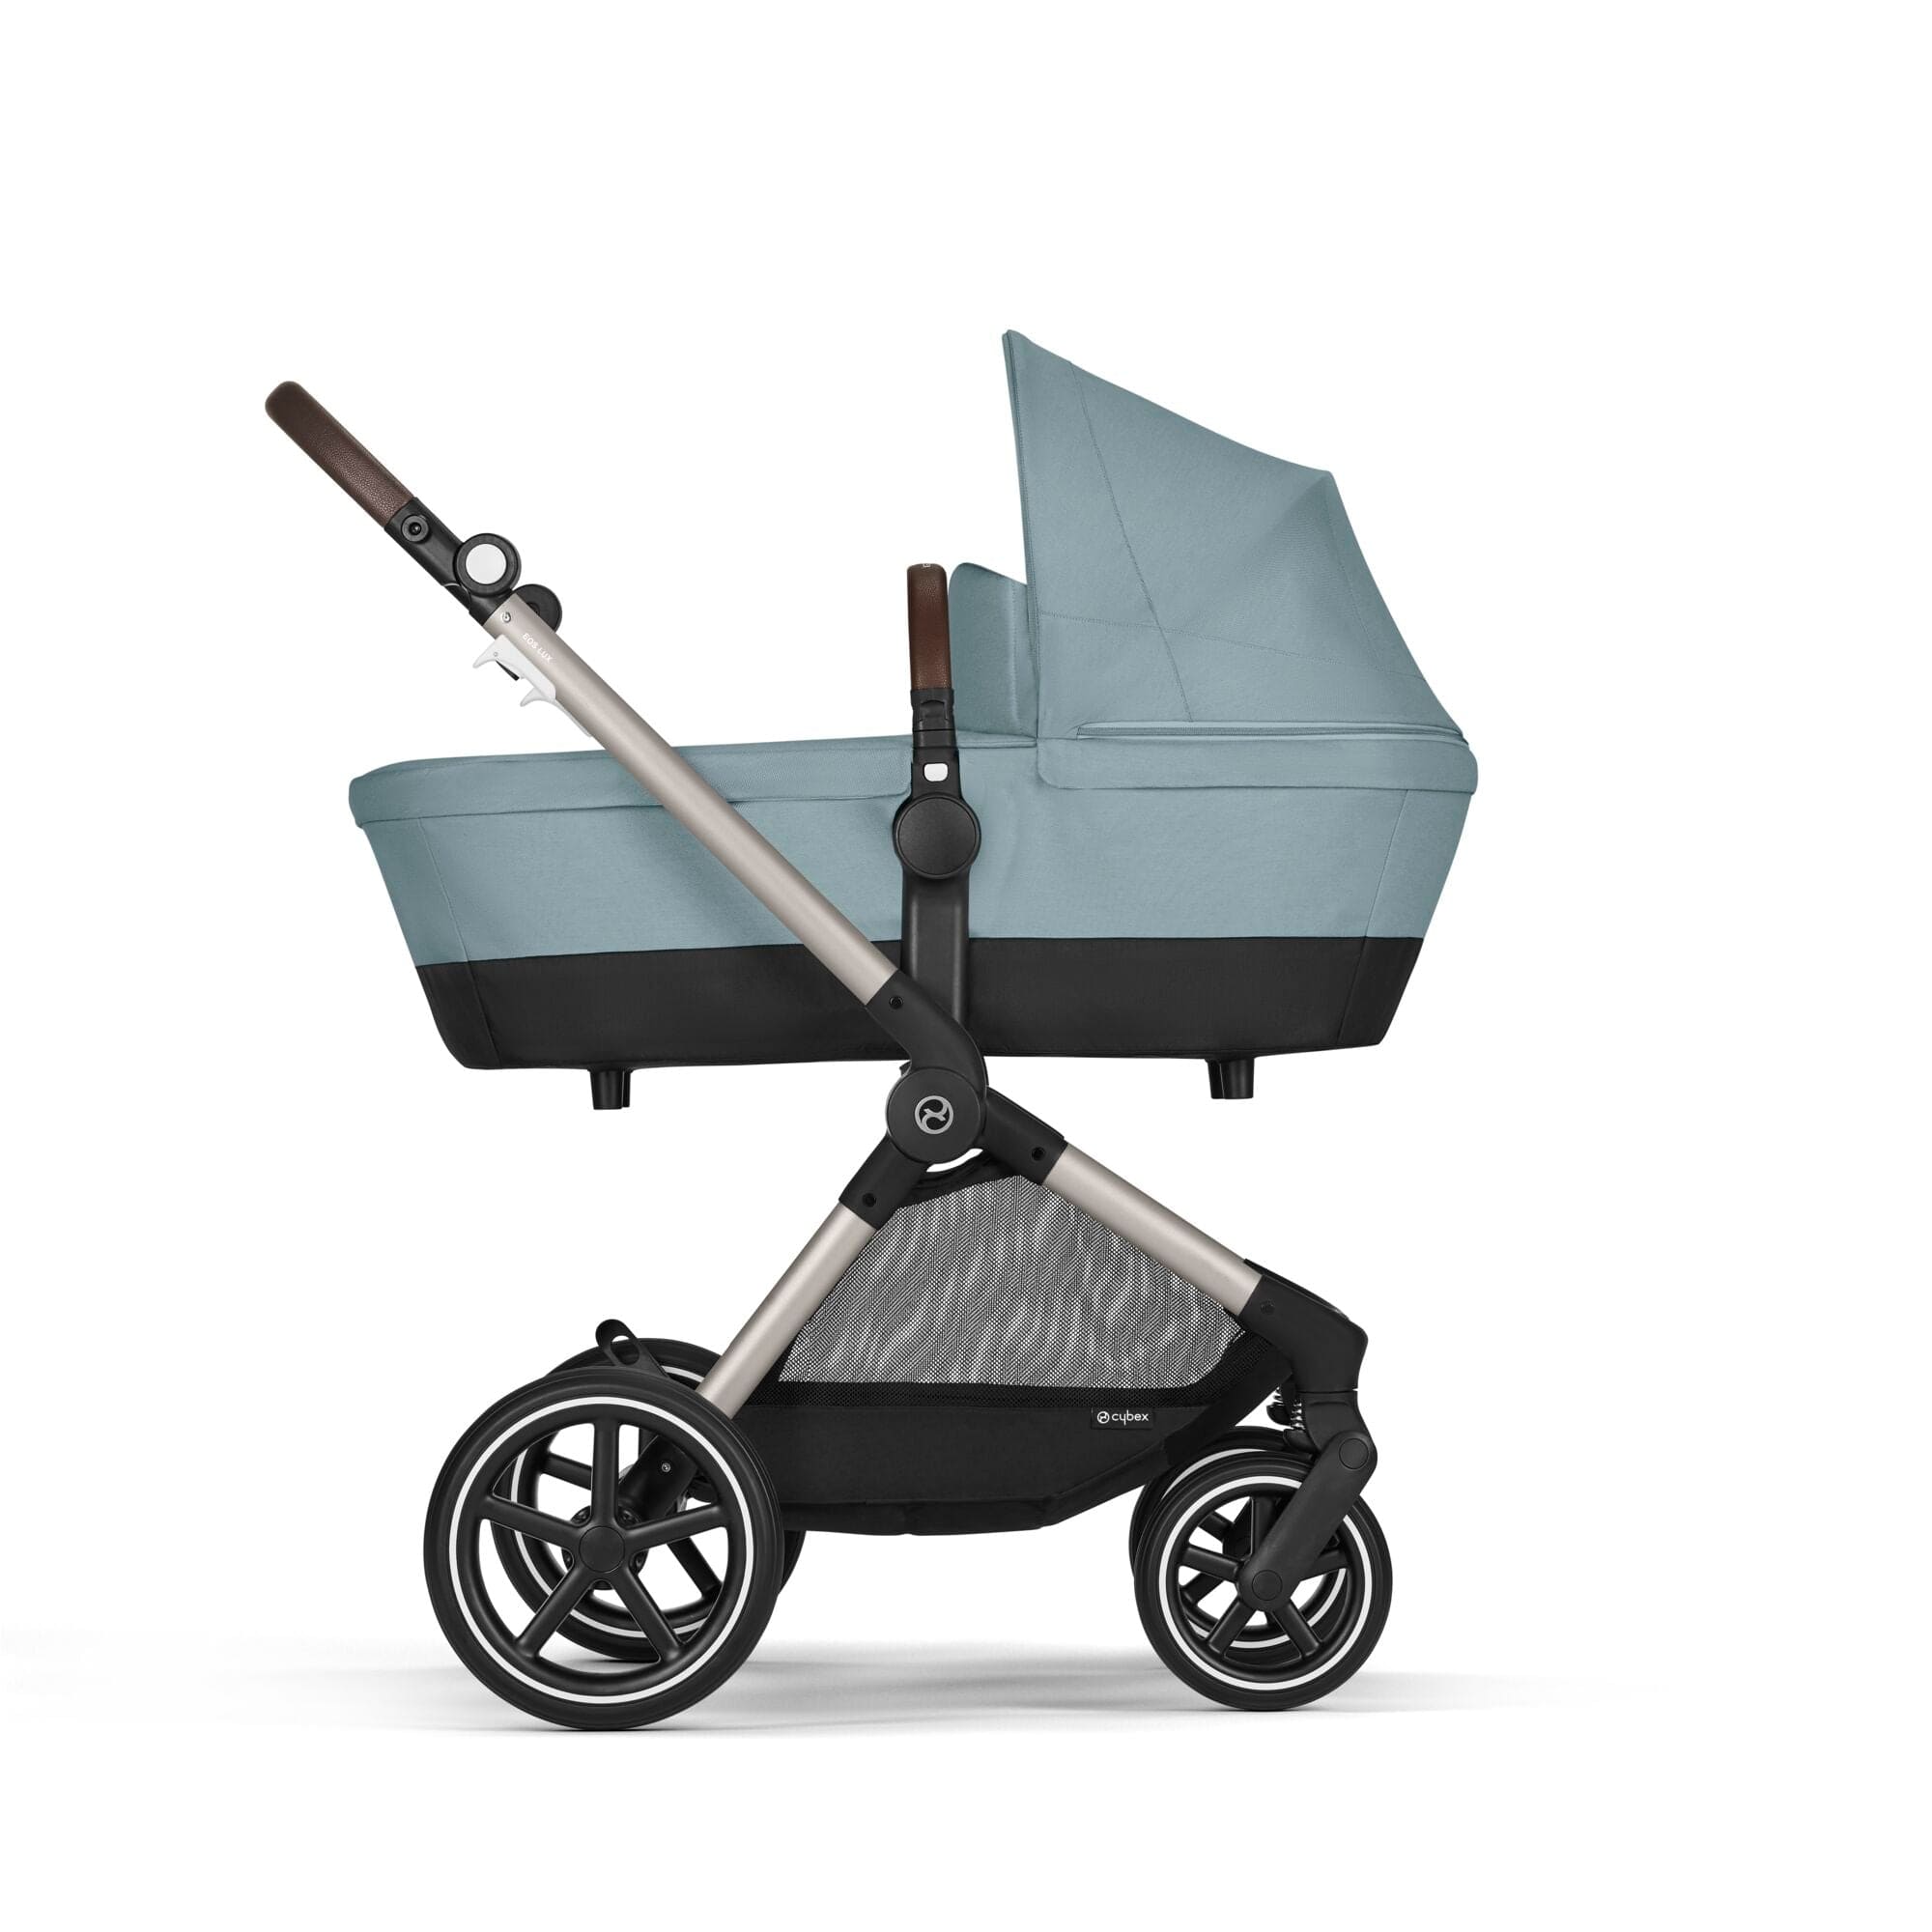 Cybex Eos Lux Stroller in Sky Blue Travel Systems 522003831 4063846368150